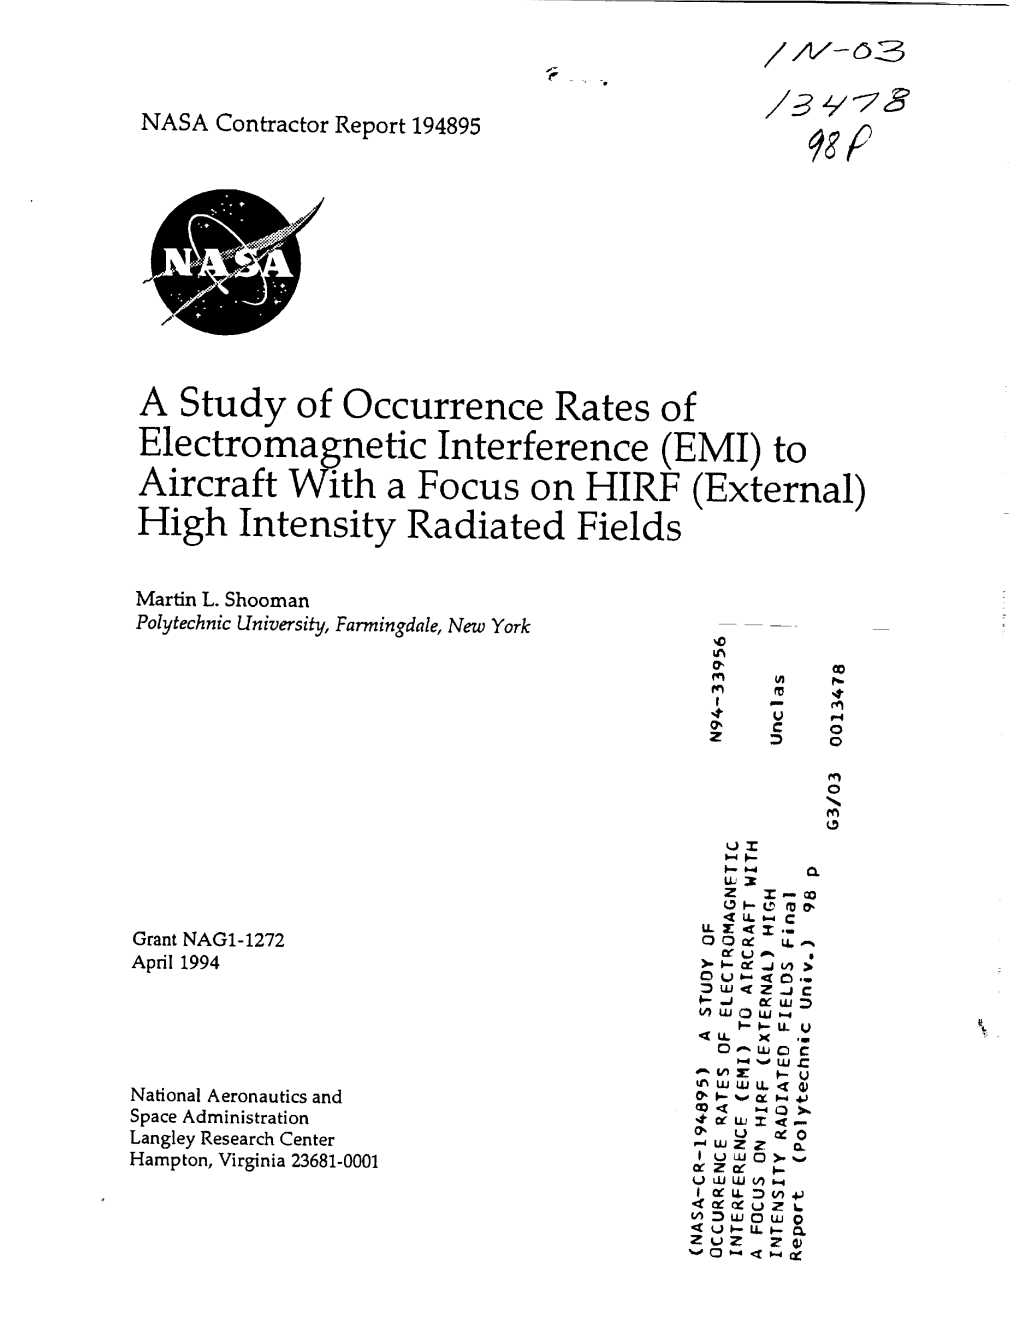 (EMI) to Aircraft with a Focus on HIRF (External) High Intensity Radiated Fields